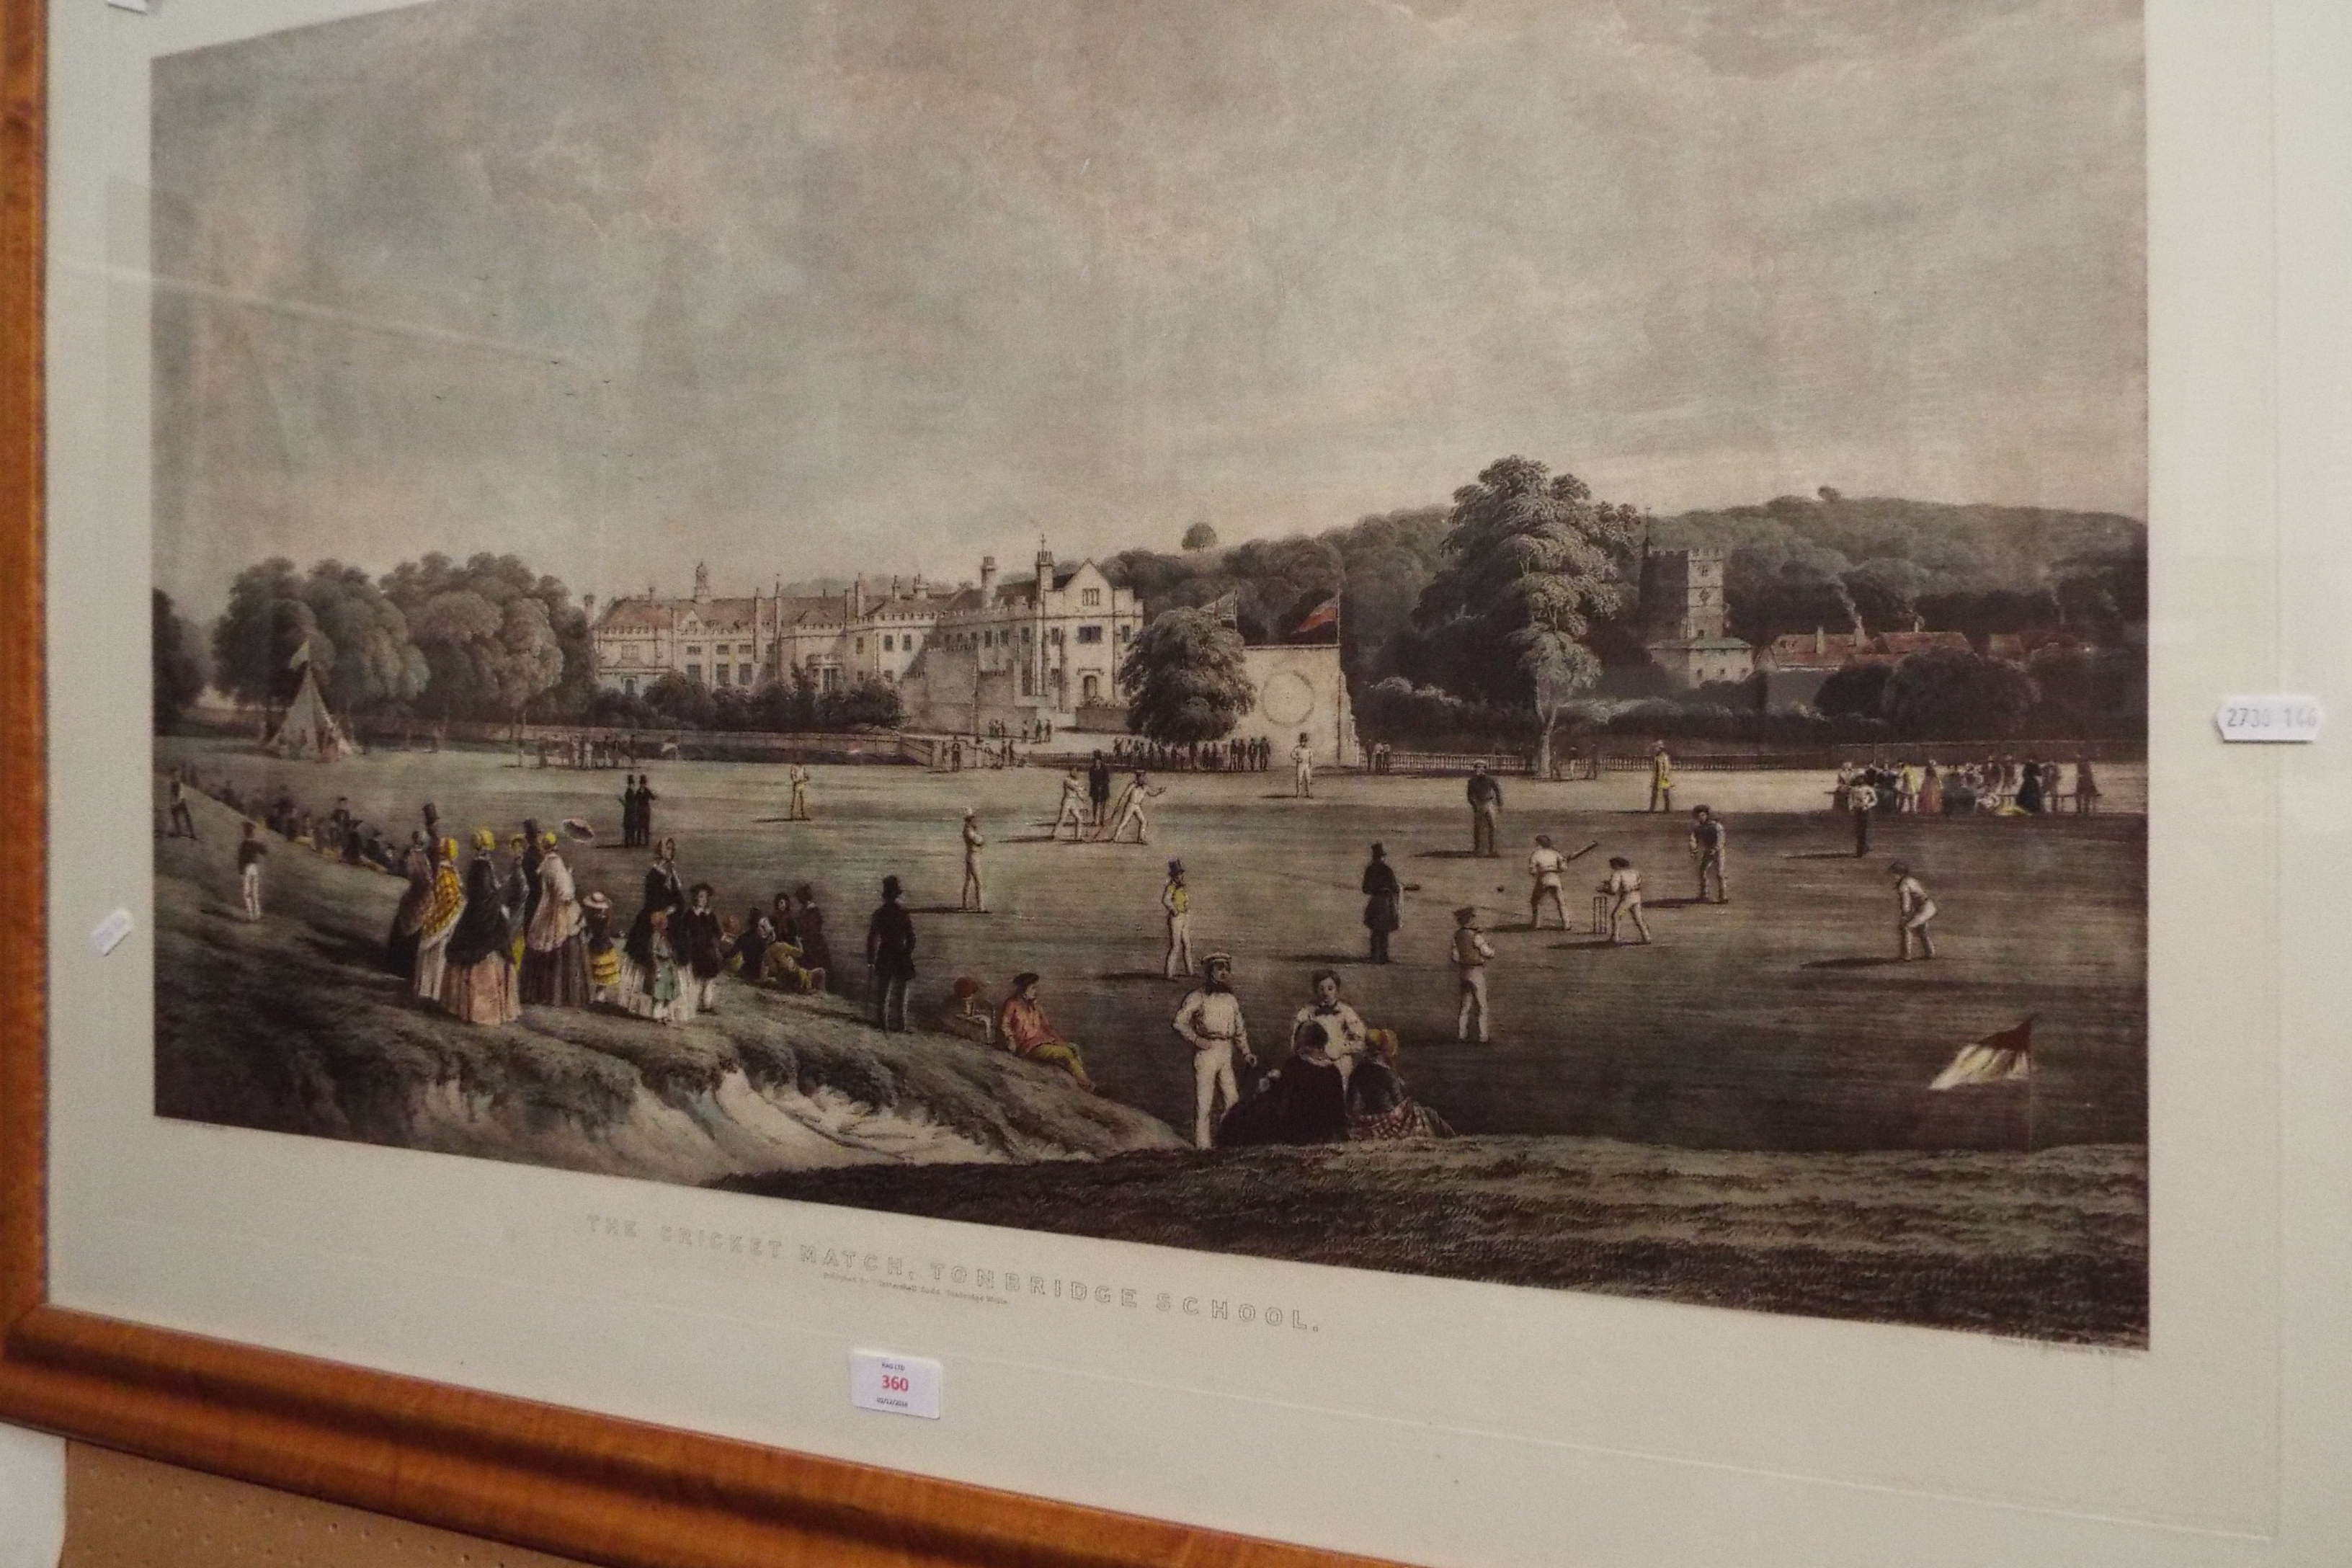 A 19thC colour lithograph titled 'The Cricket Match; Tonbridge School', by C.T. Dodd and W.L.